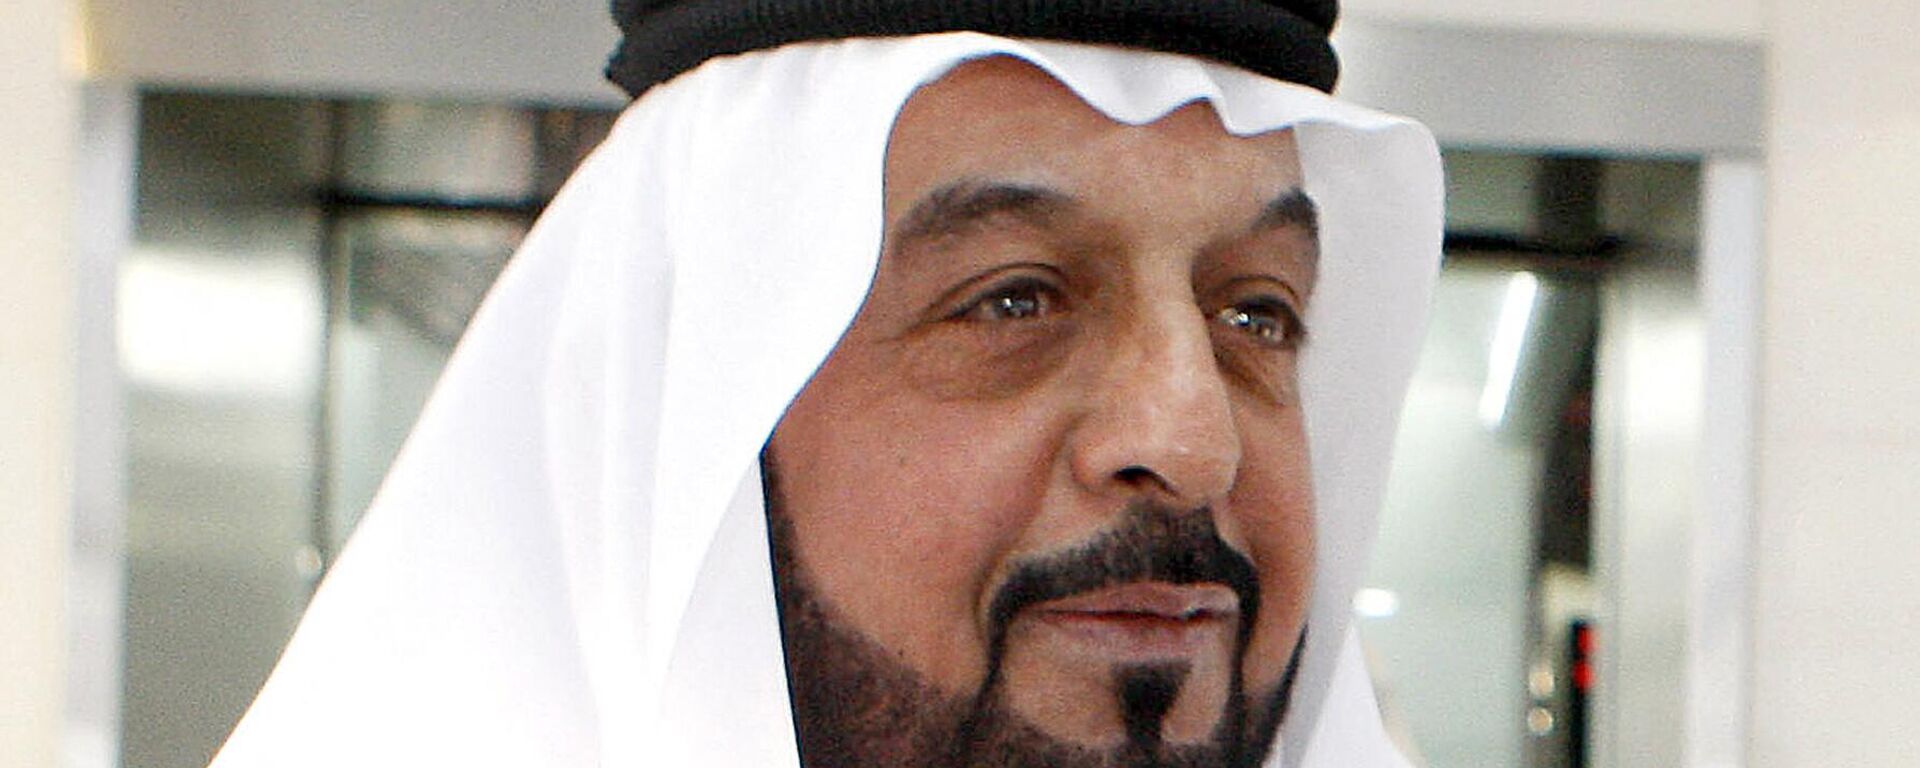 A handout picture released by the Emirates News Agency WAM shows Emirati President Sheikh Khalifa bin Zayed al-Nahayan arriving at the Shams Tower to watch the Abu Dhabi Formula One Grand Prix at the Yas Marina circuit on November 1, 2009. Al-Nahayan, also ruler of Abu Dhabi, was nominated by the Emirates Supreme Federal Council for a second five-year term as president of the United Arab Emirates, WAM announced on November 3, 2009.
AFP PHOTO/WAM/HO - Sputnik International, 1920, 13.05.2022